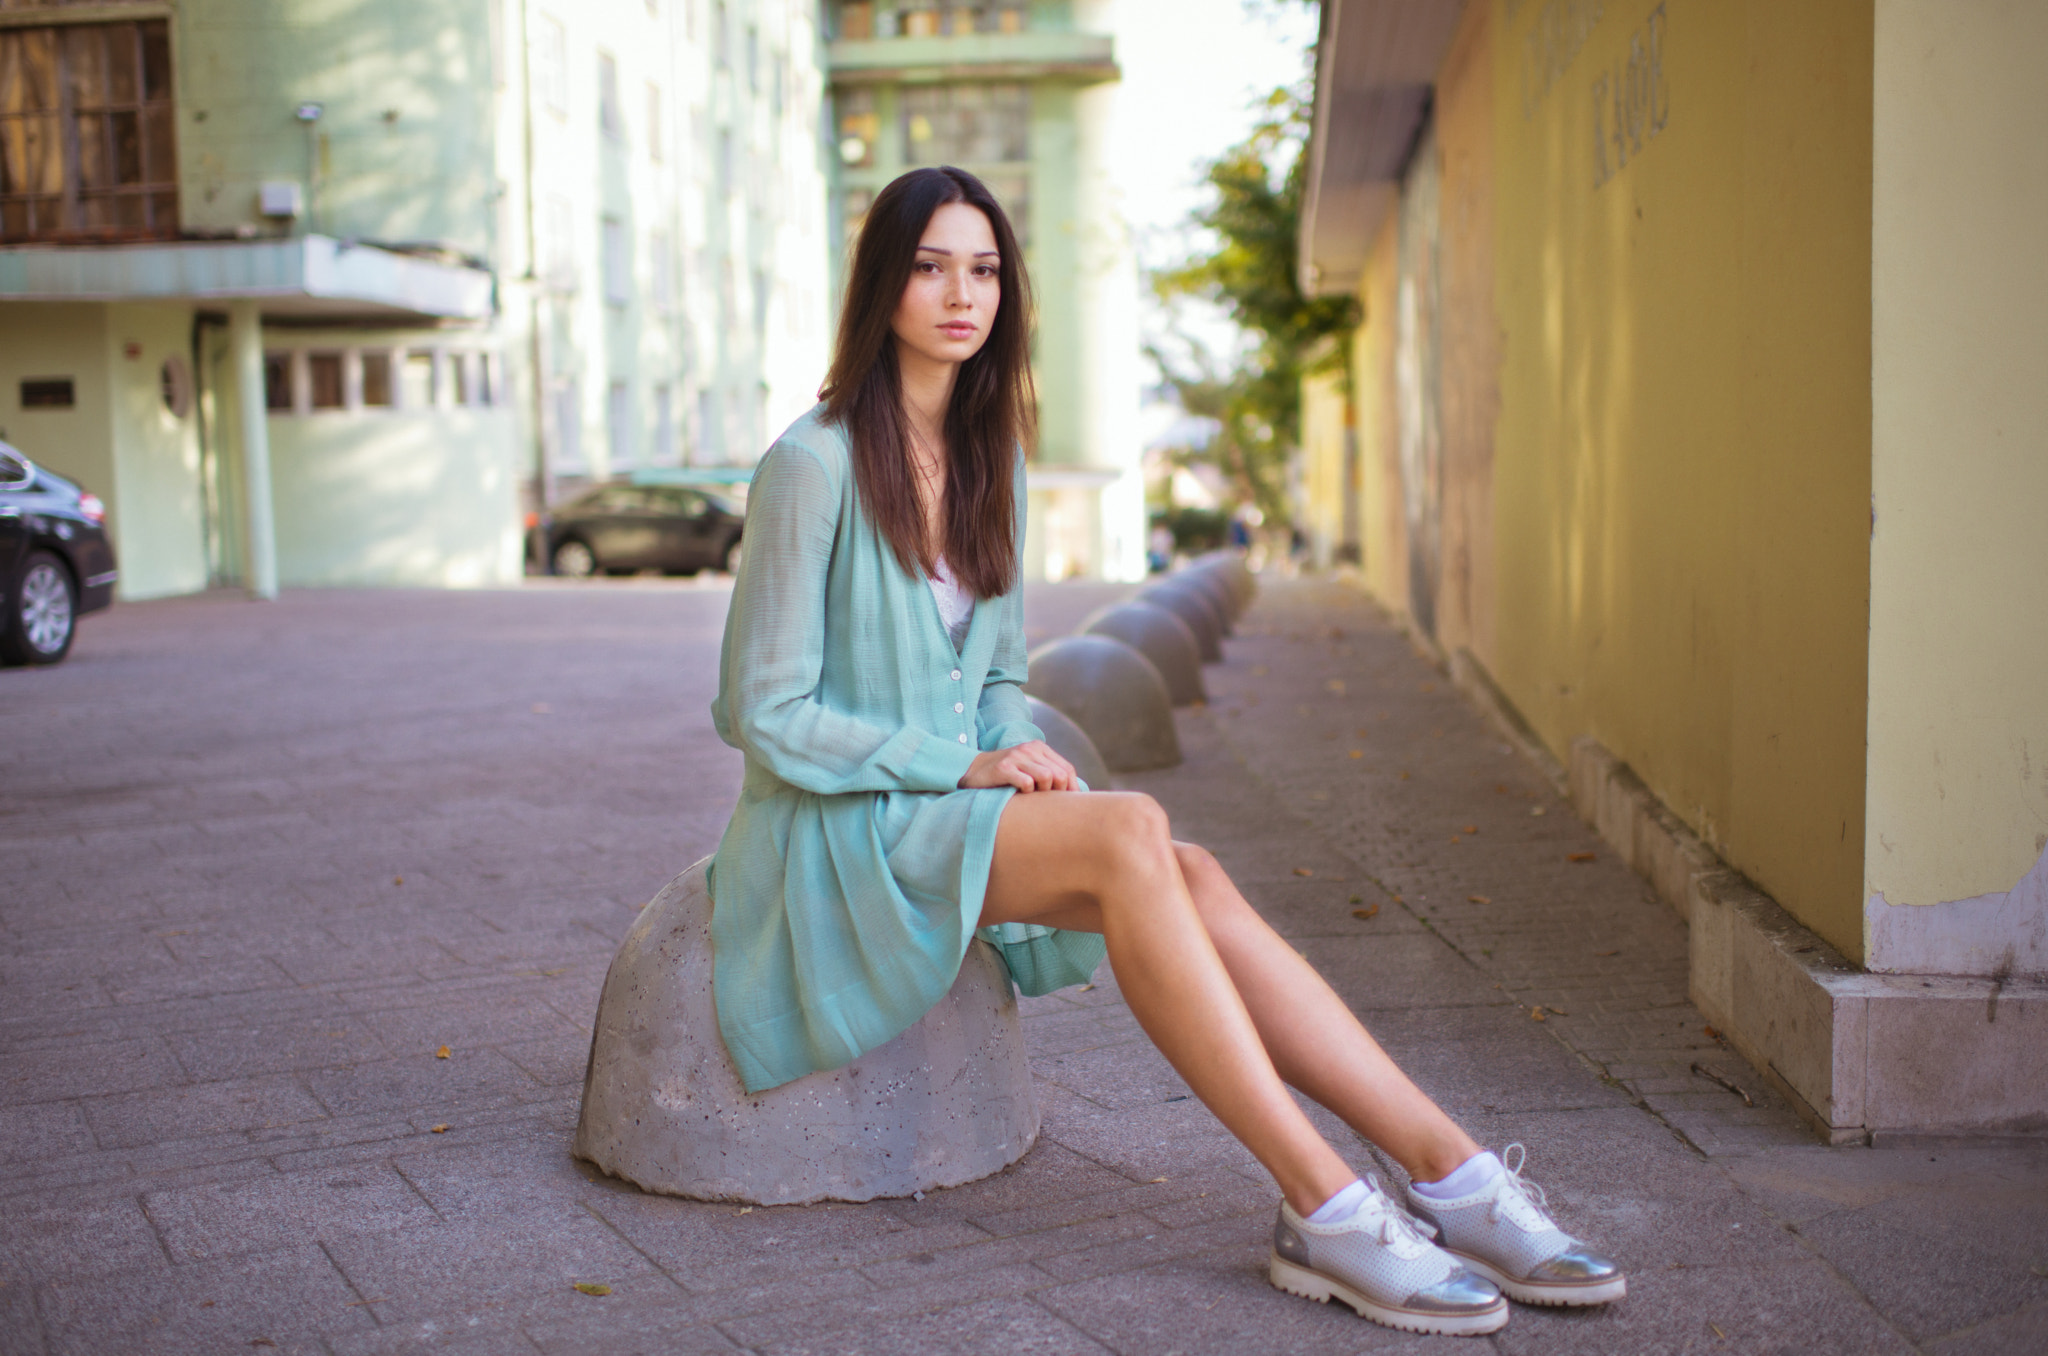 Maxim Maximov Women Mariya Volokh Brunette Looking At Viewer Turquise Sneakers Outdoors Freckles 2048x1356